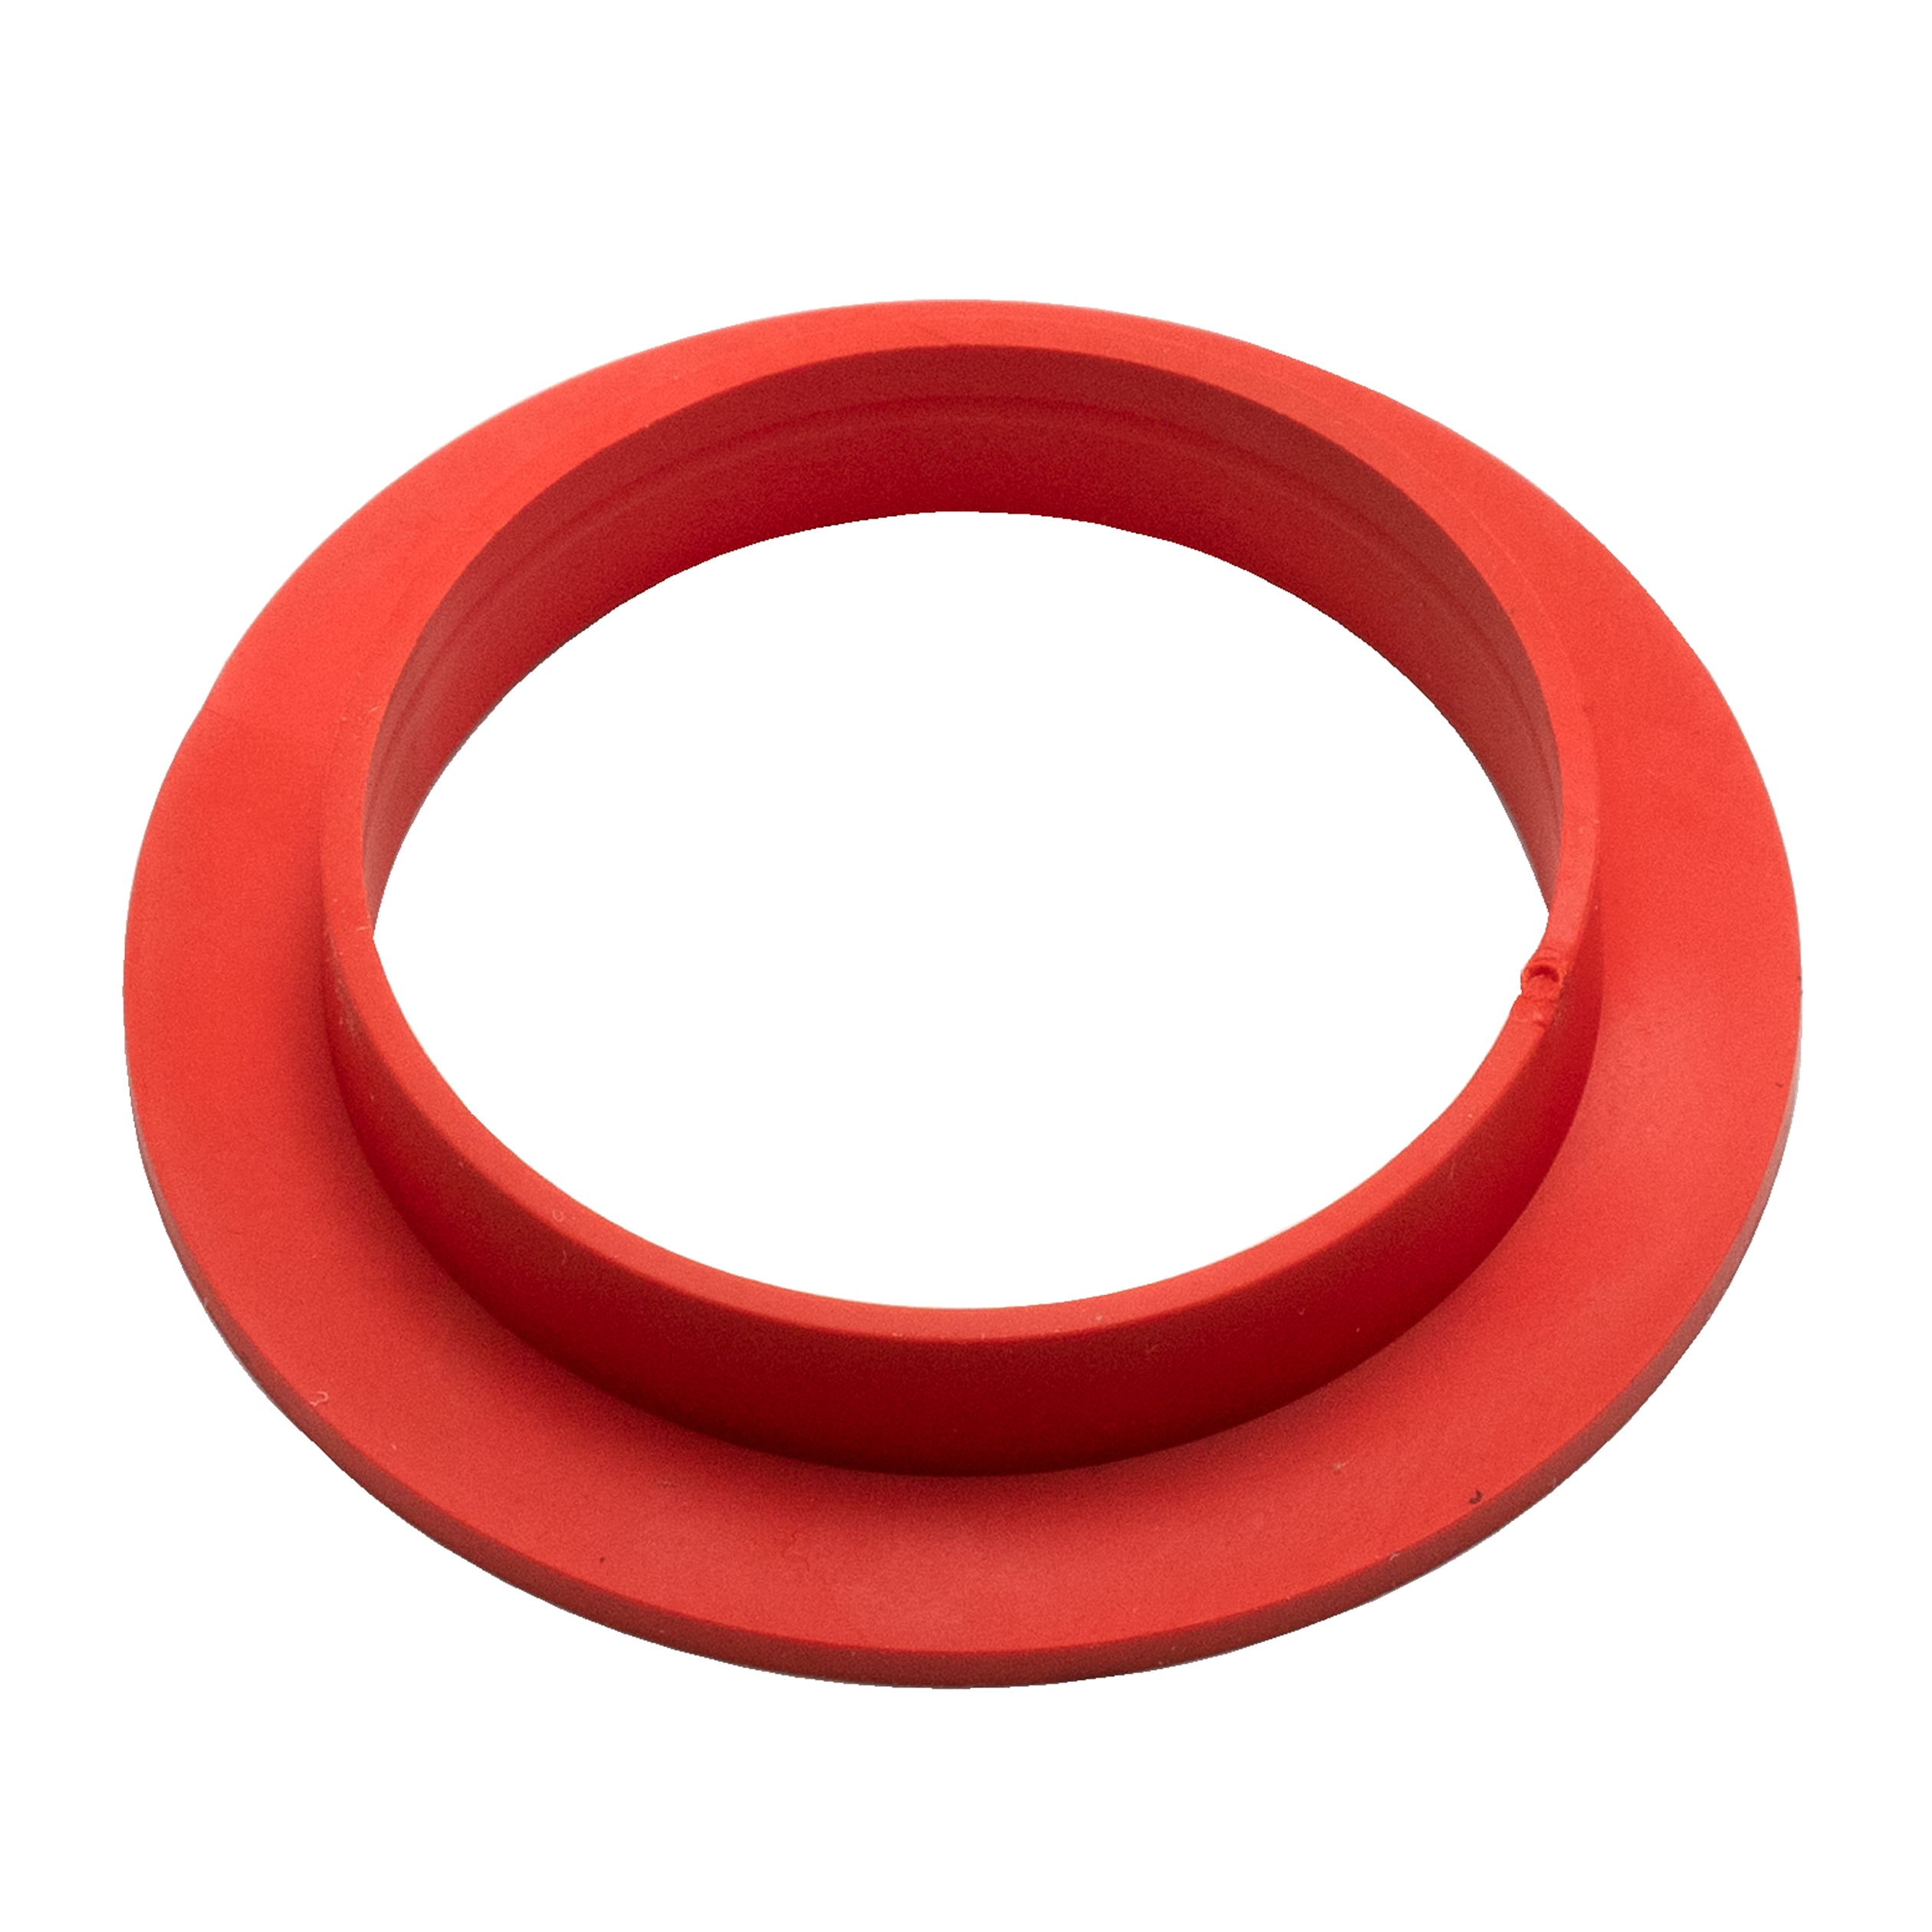 Keeney 50879TPRUK 1-1/2-Inch Rubber Tailpiece Washer Red 